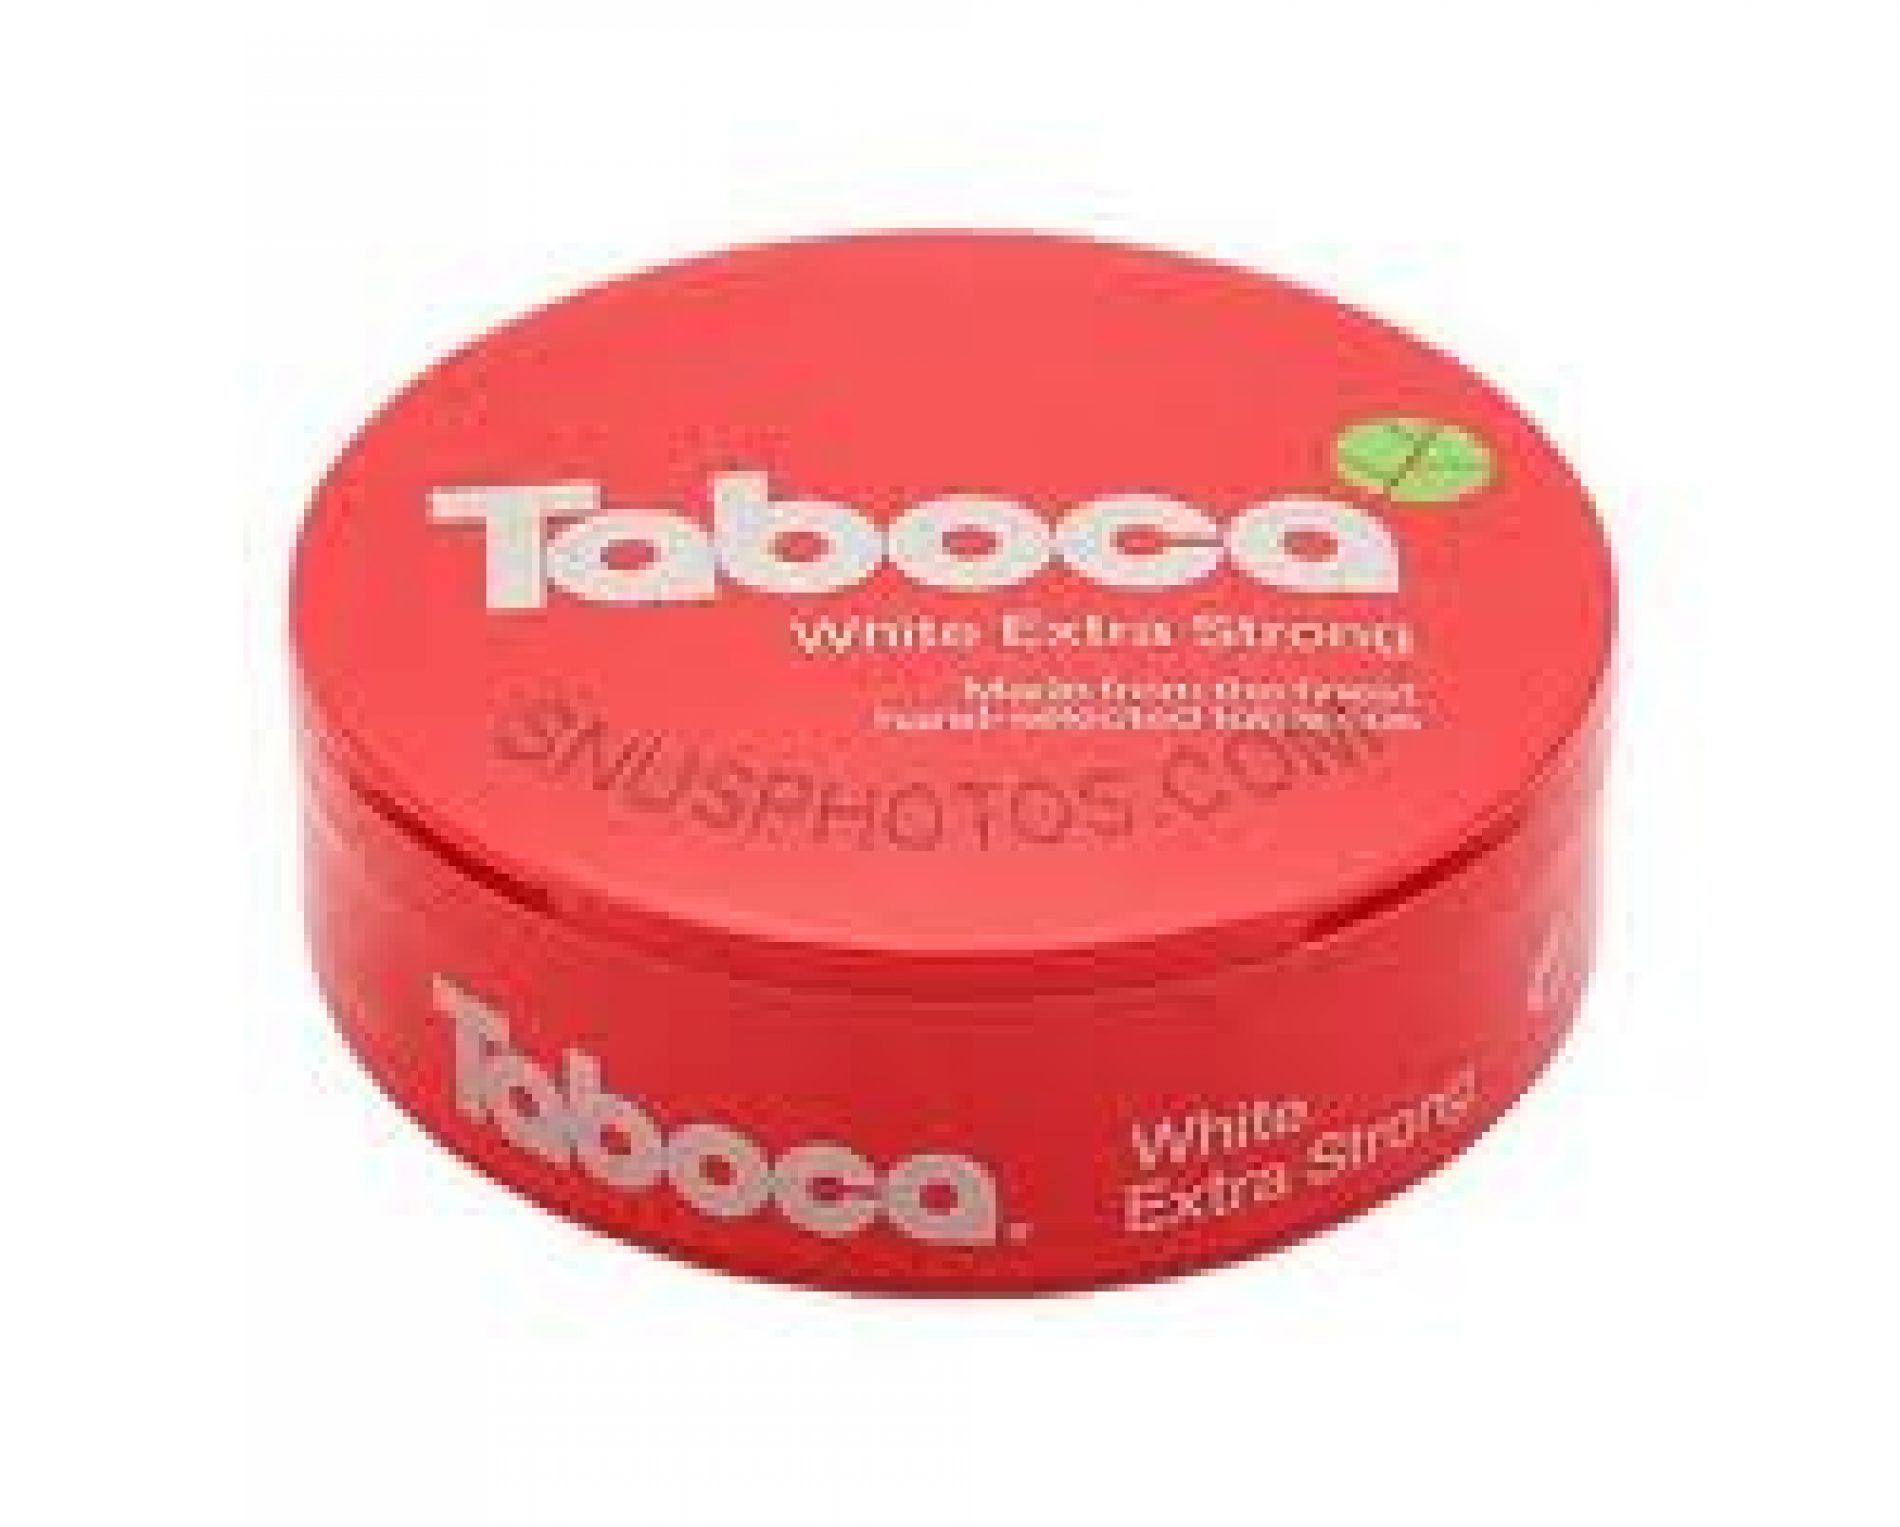 Taboca White Extra Strong portion snus, That Snus Guy’s  first snus review on SnusCentral in almost 3 years!!